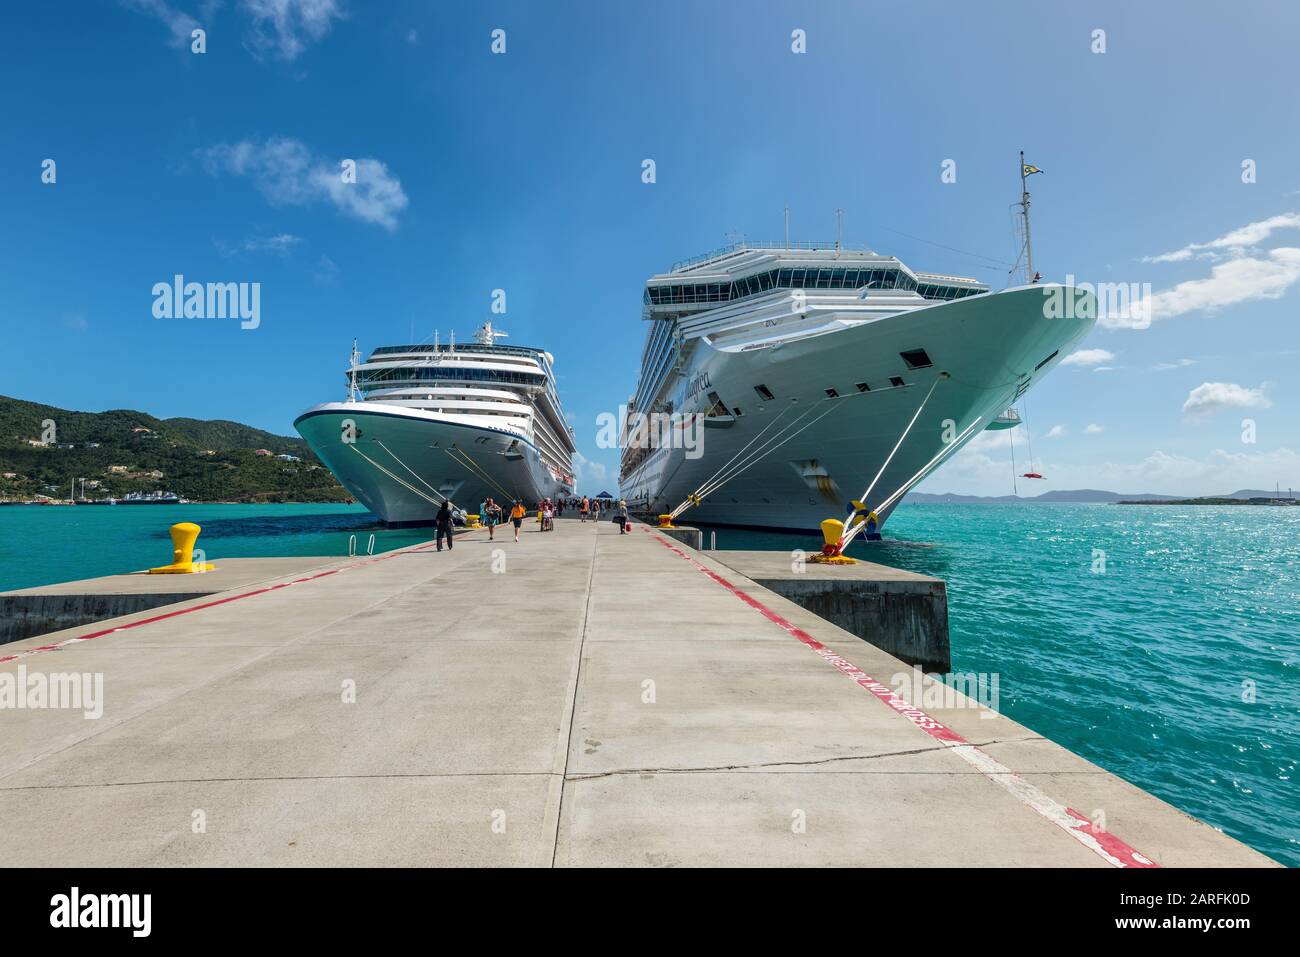 Road Town, British Virgin Islands - December 16, 2018: Cruise ships Riviera and Costa Magica at quay of port in Road Town, Tortola, British Virgin Isl Stock Photo